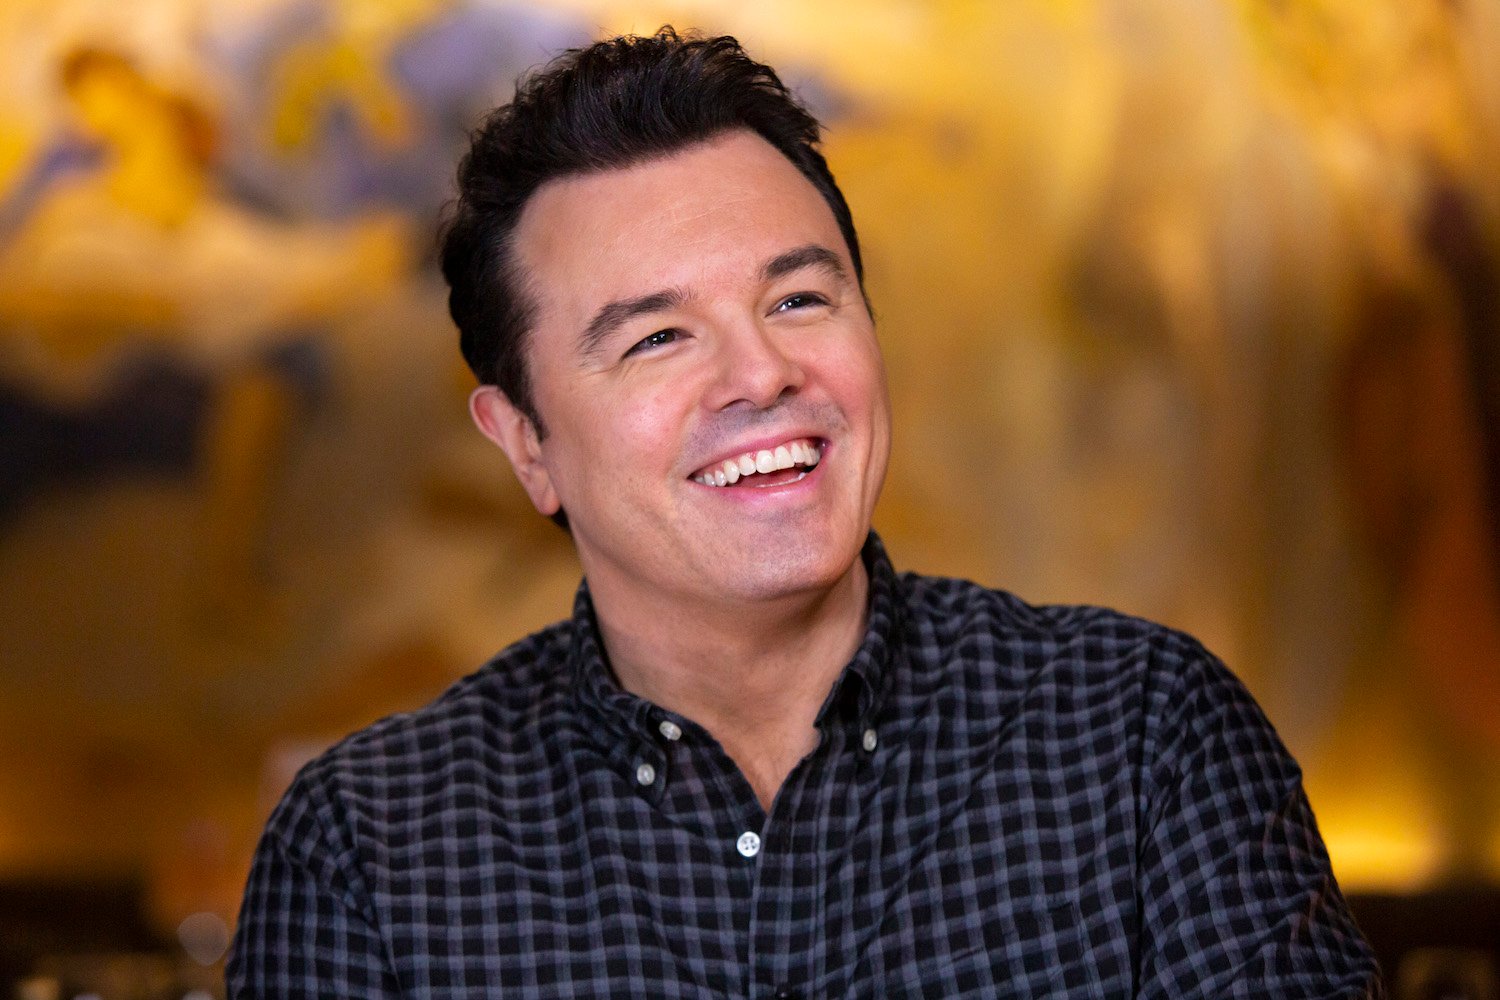 Oscars host Seth MacFarlane smiles and years later reveals he was drunk